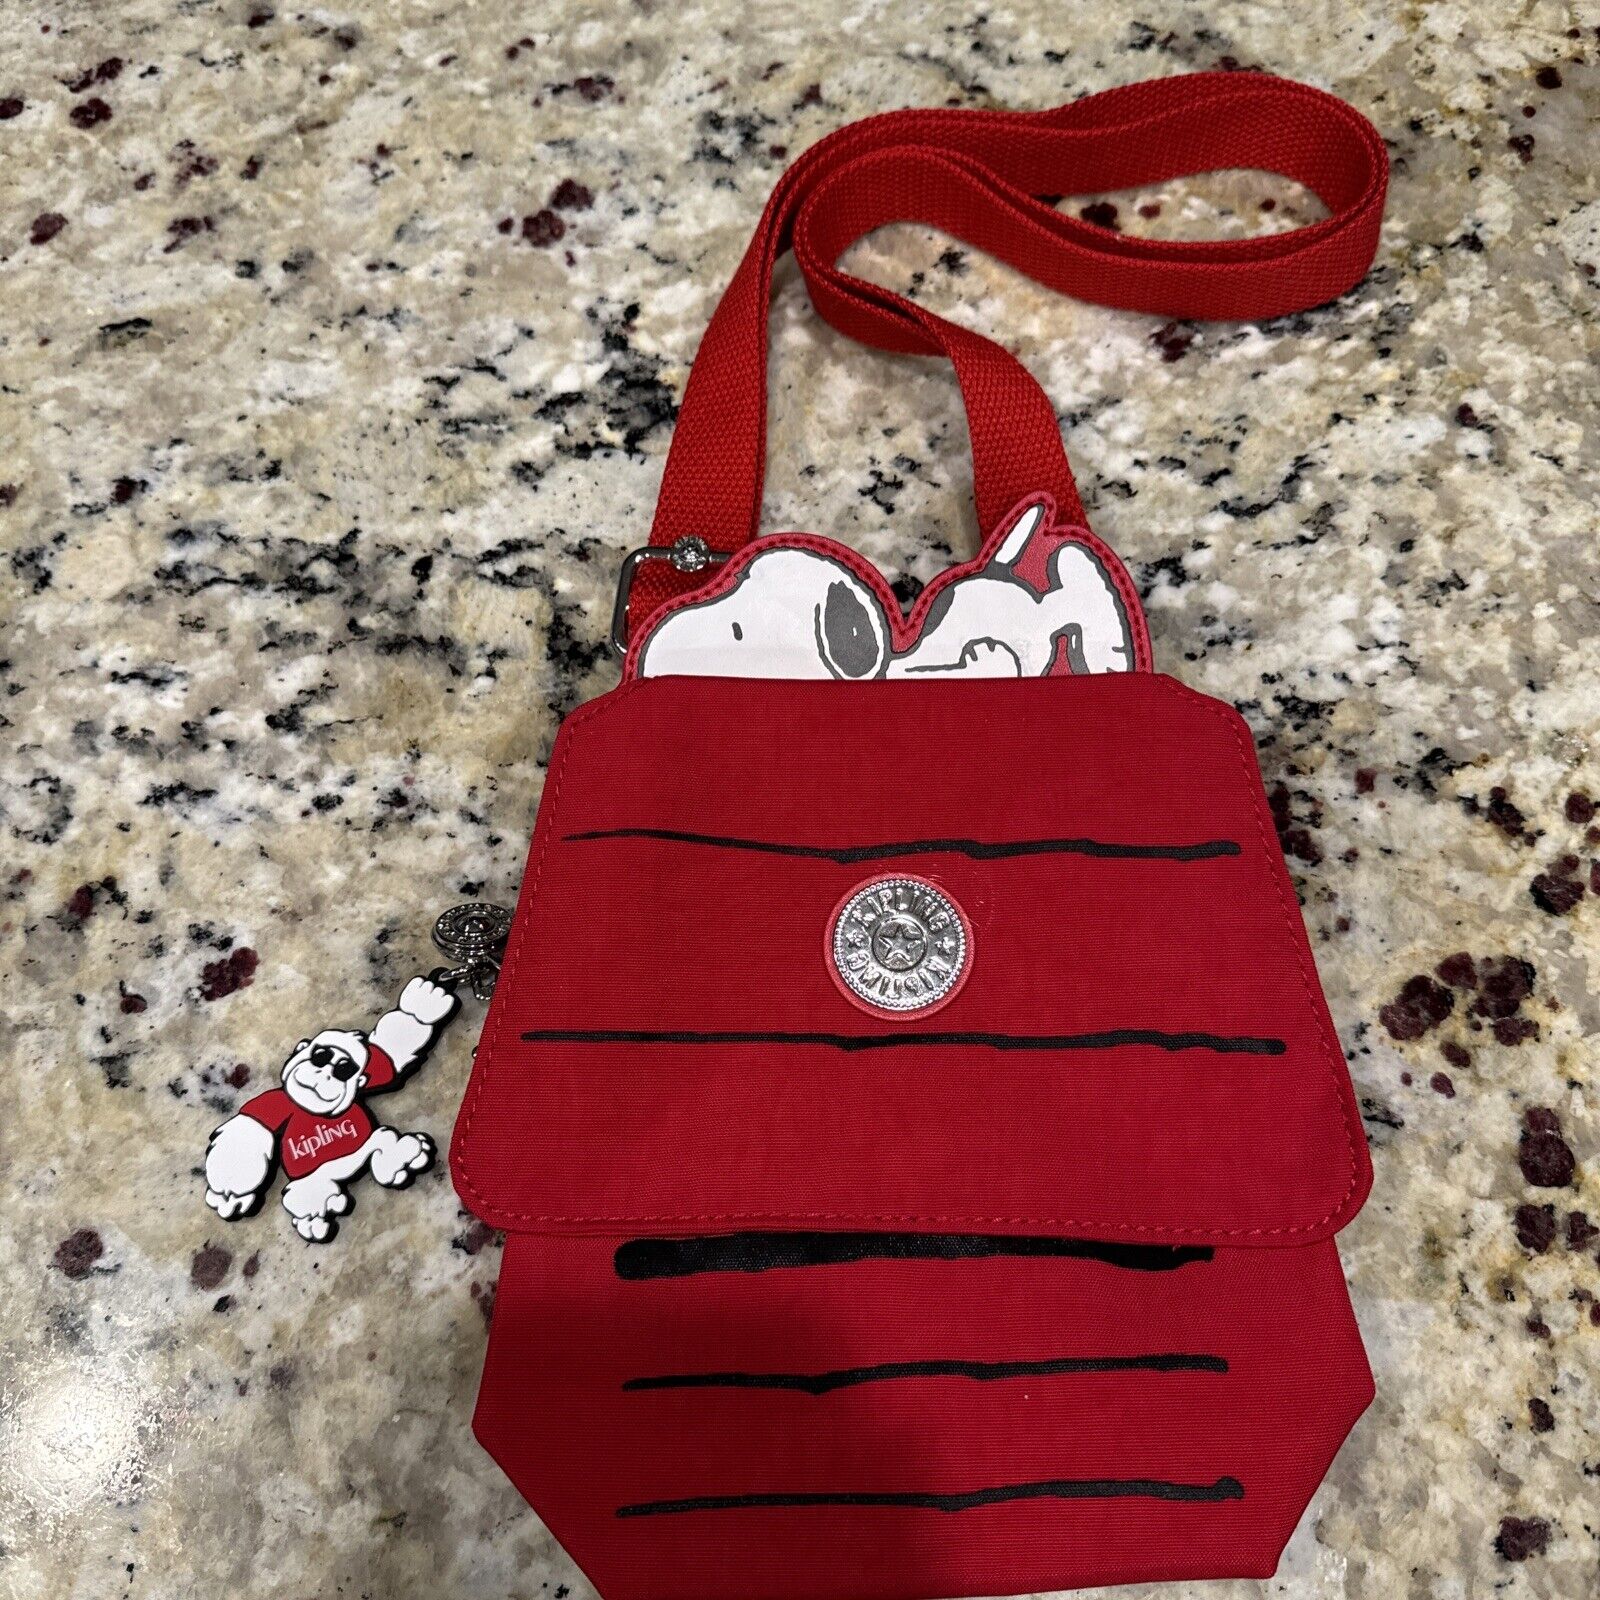 Kipling X Peanuts Crossbody Bag Purse Red SNOOPY House Doggy Print New SOLD OUT